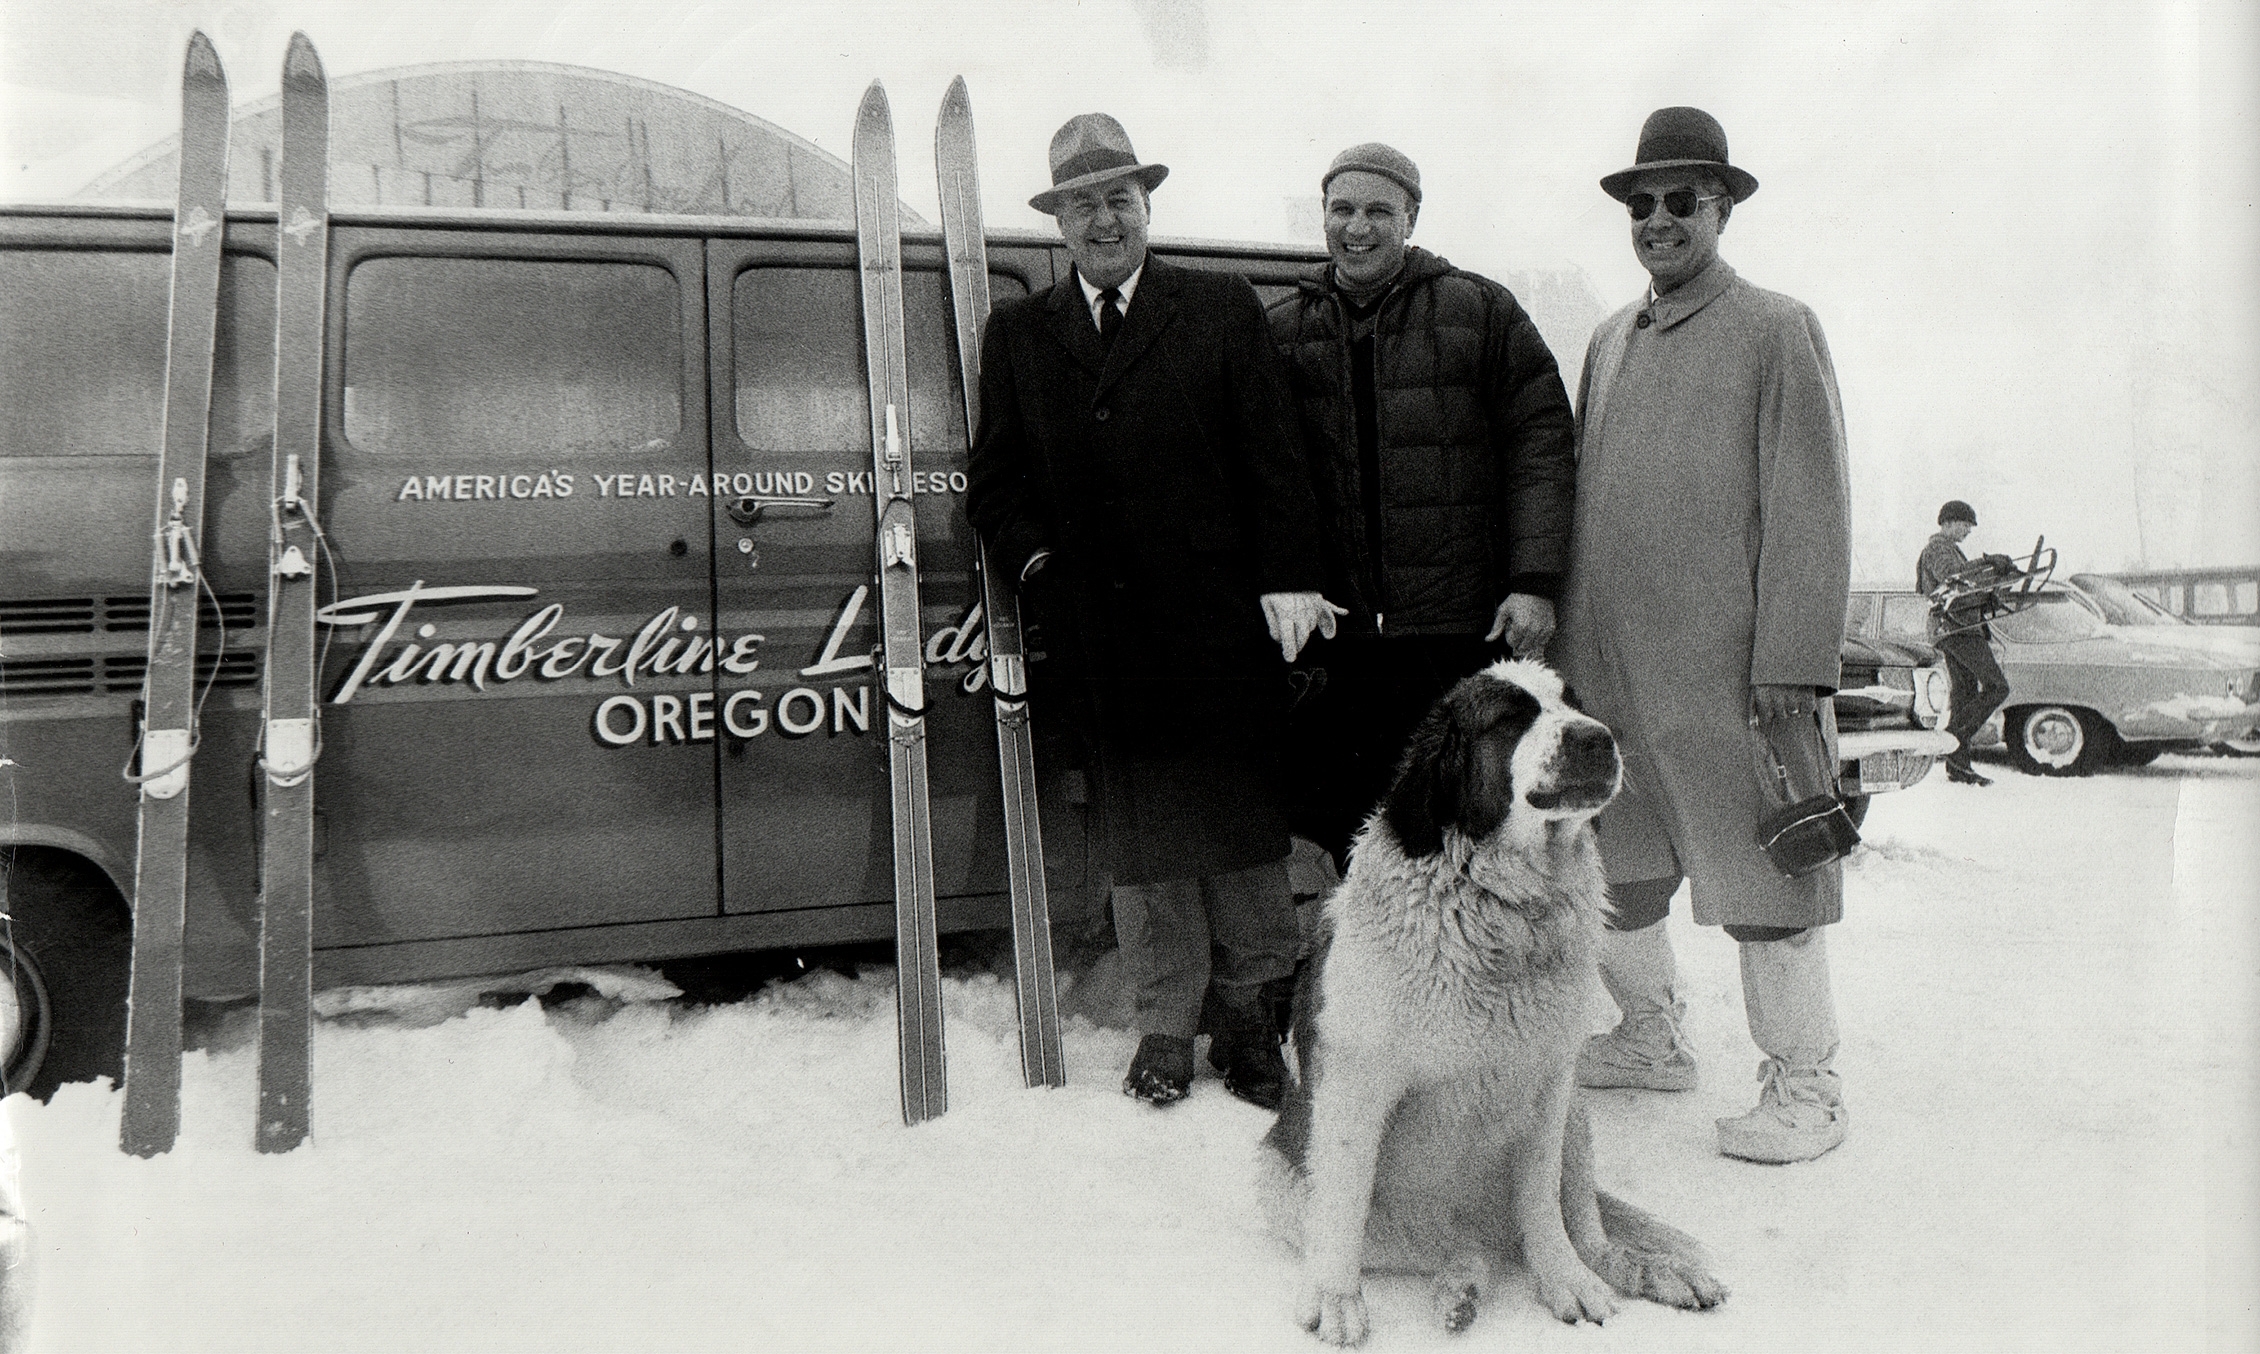 VINTAGE PHOTO OF R.L. KOHNSTAMM AND TWO OTHER MEN WITH ST. BERNARD IN FRONT OF TIMBERLINE LODGE VAN AND SKIS